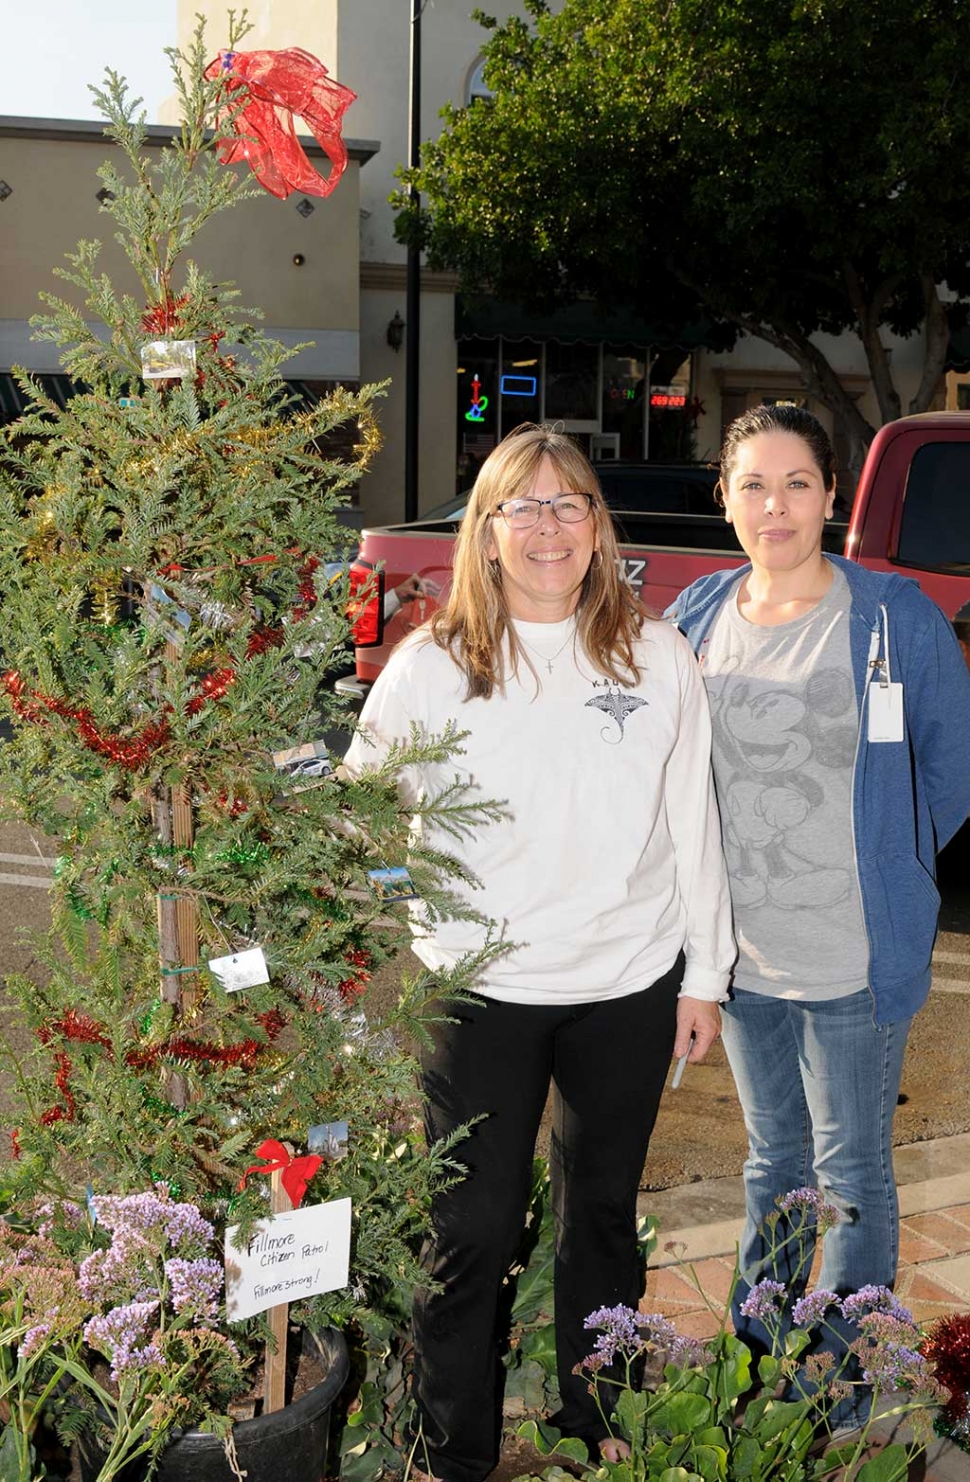 Lisa Hammond (left) and a friend were seen on Central Avenue decorating one of the many Christmas trees that lined Central Avenue downtown. Each tree is decorated in it’s own way to represent the club or organization. These ladies were decorating their tree for the Fillmore Citizens Patrol.